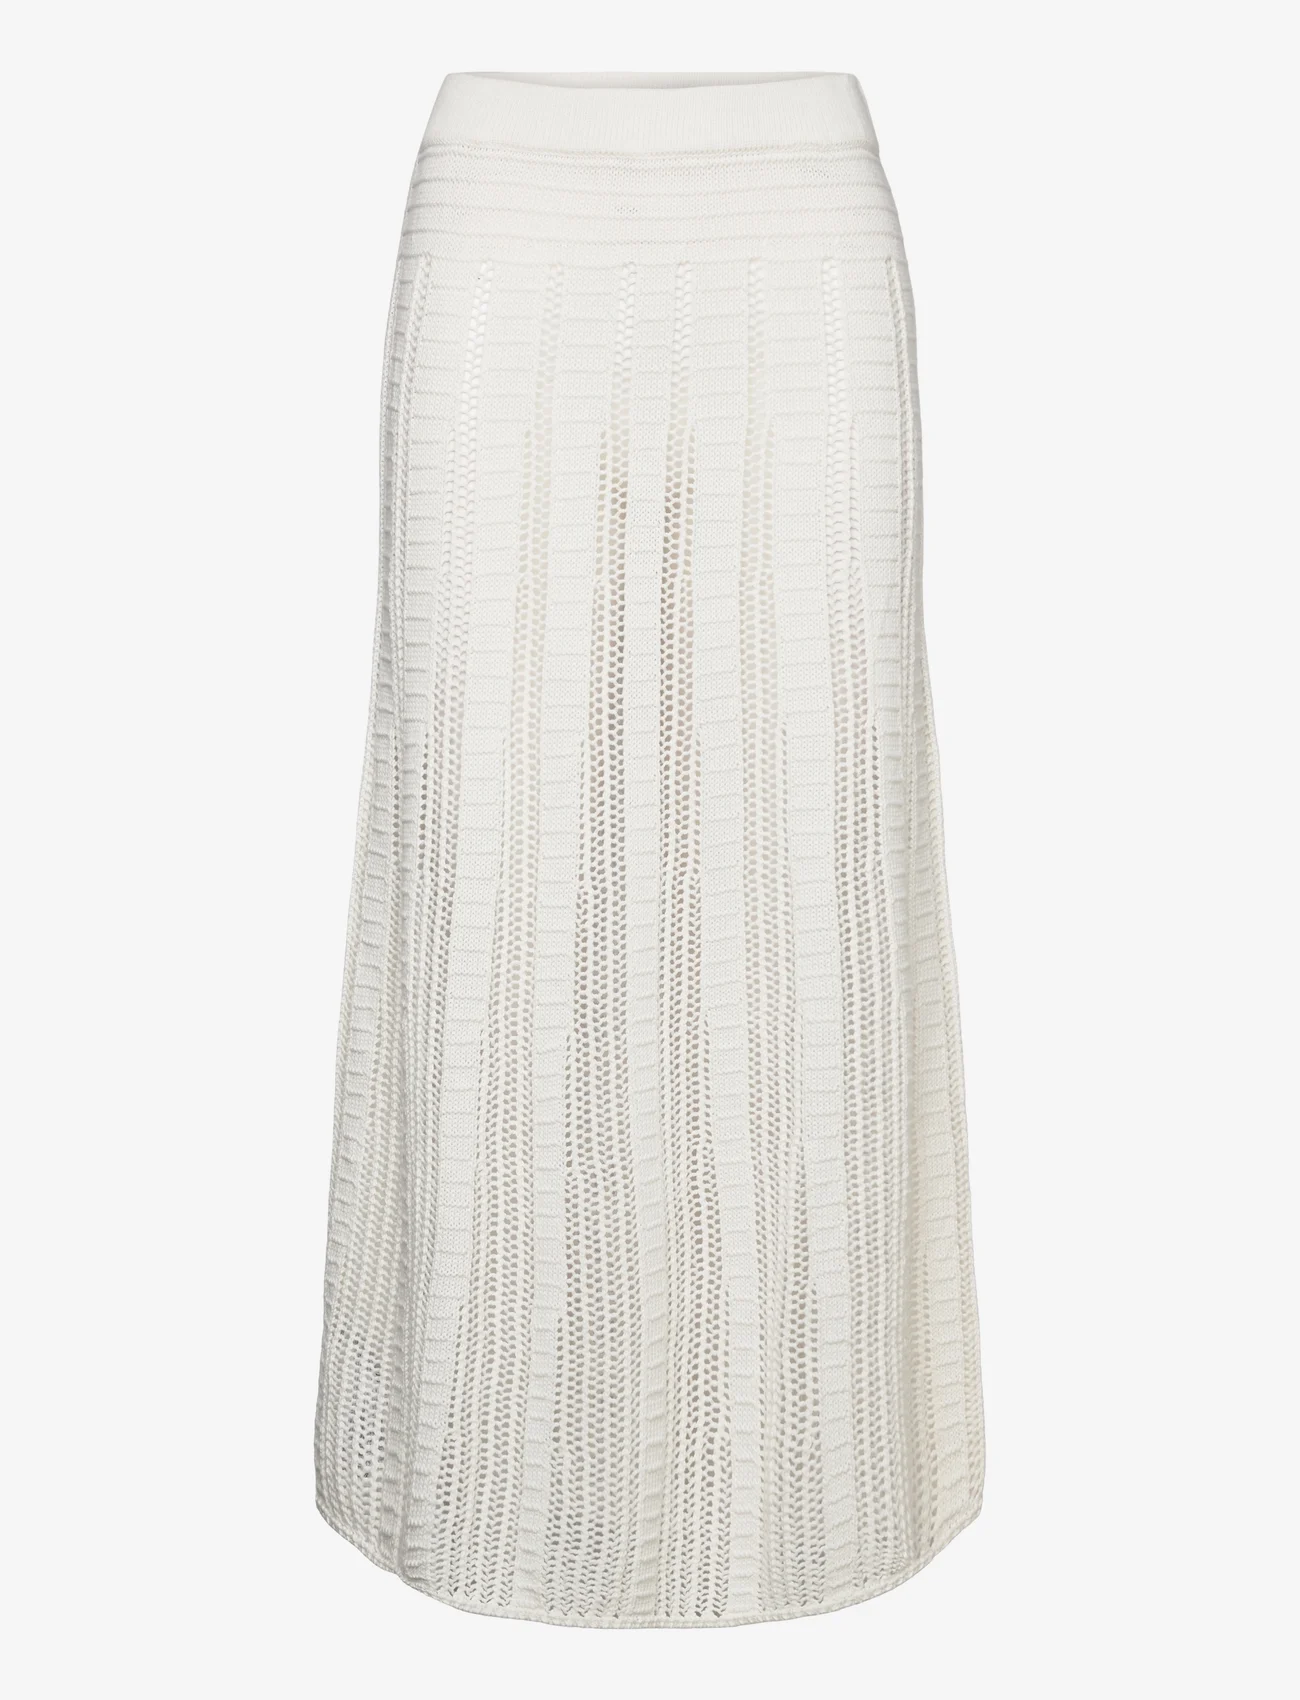 Mango - Knitted skirt with openwork details - white - 0